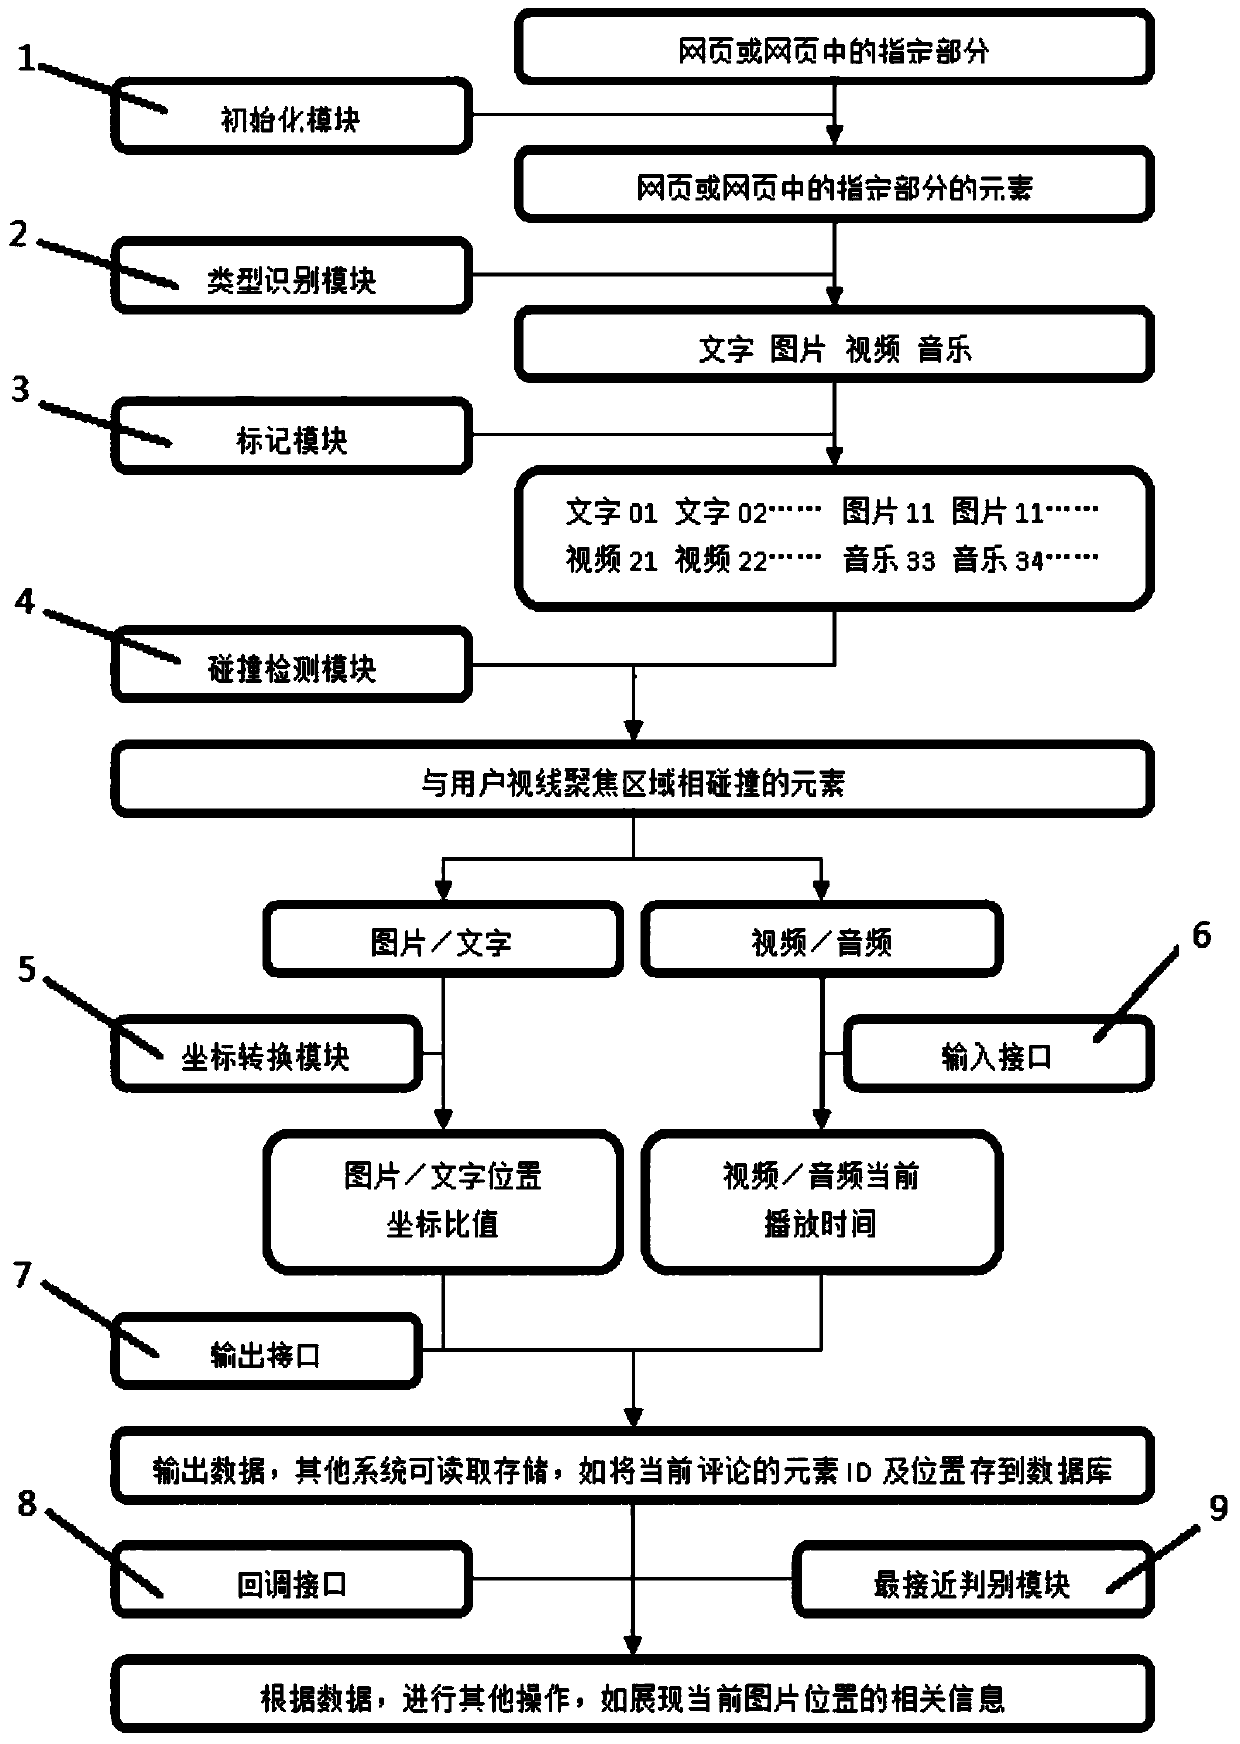 A web page location recognition system and location recognition method